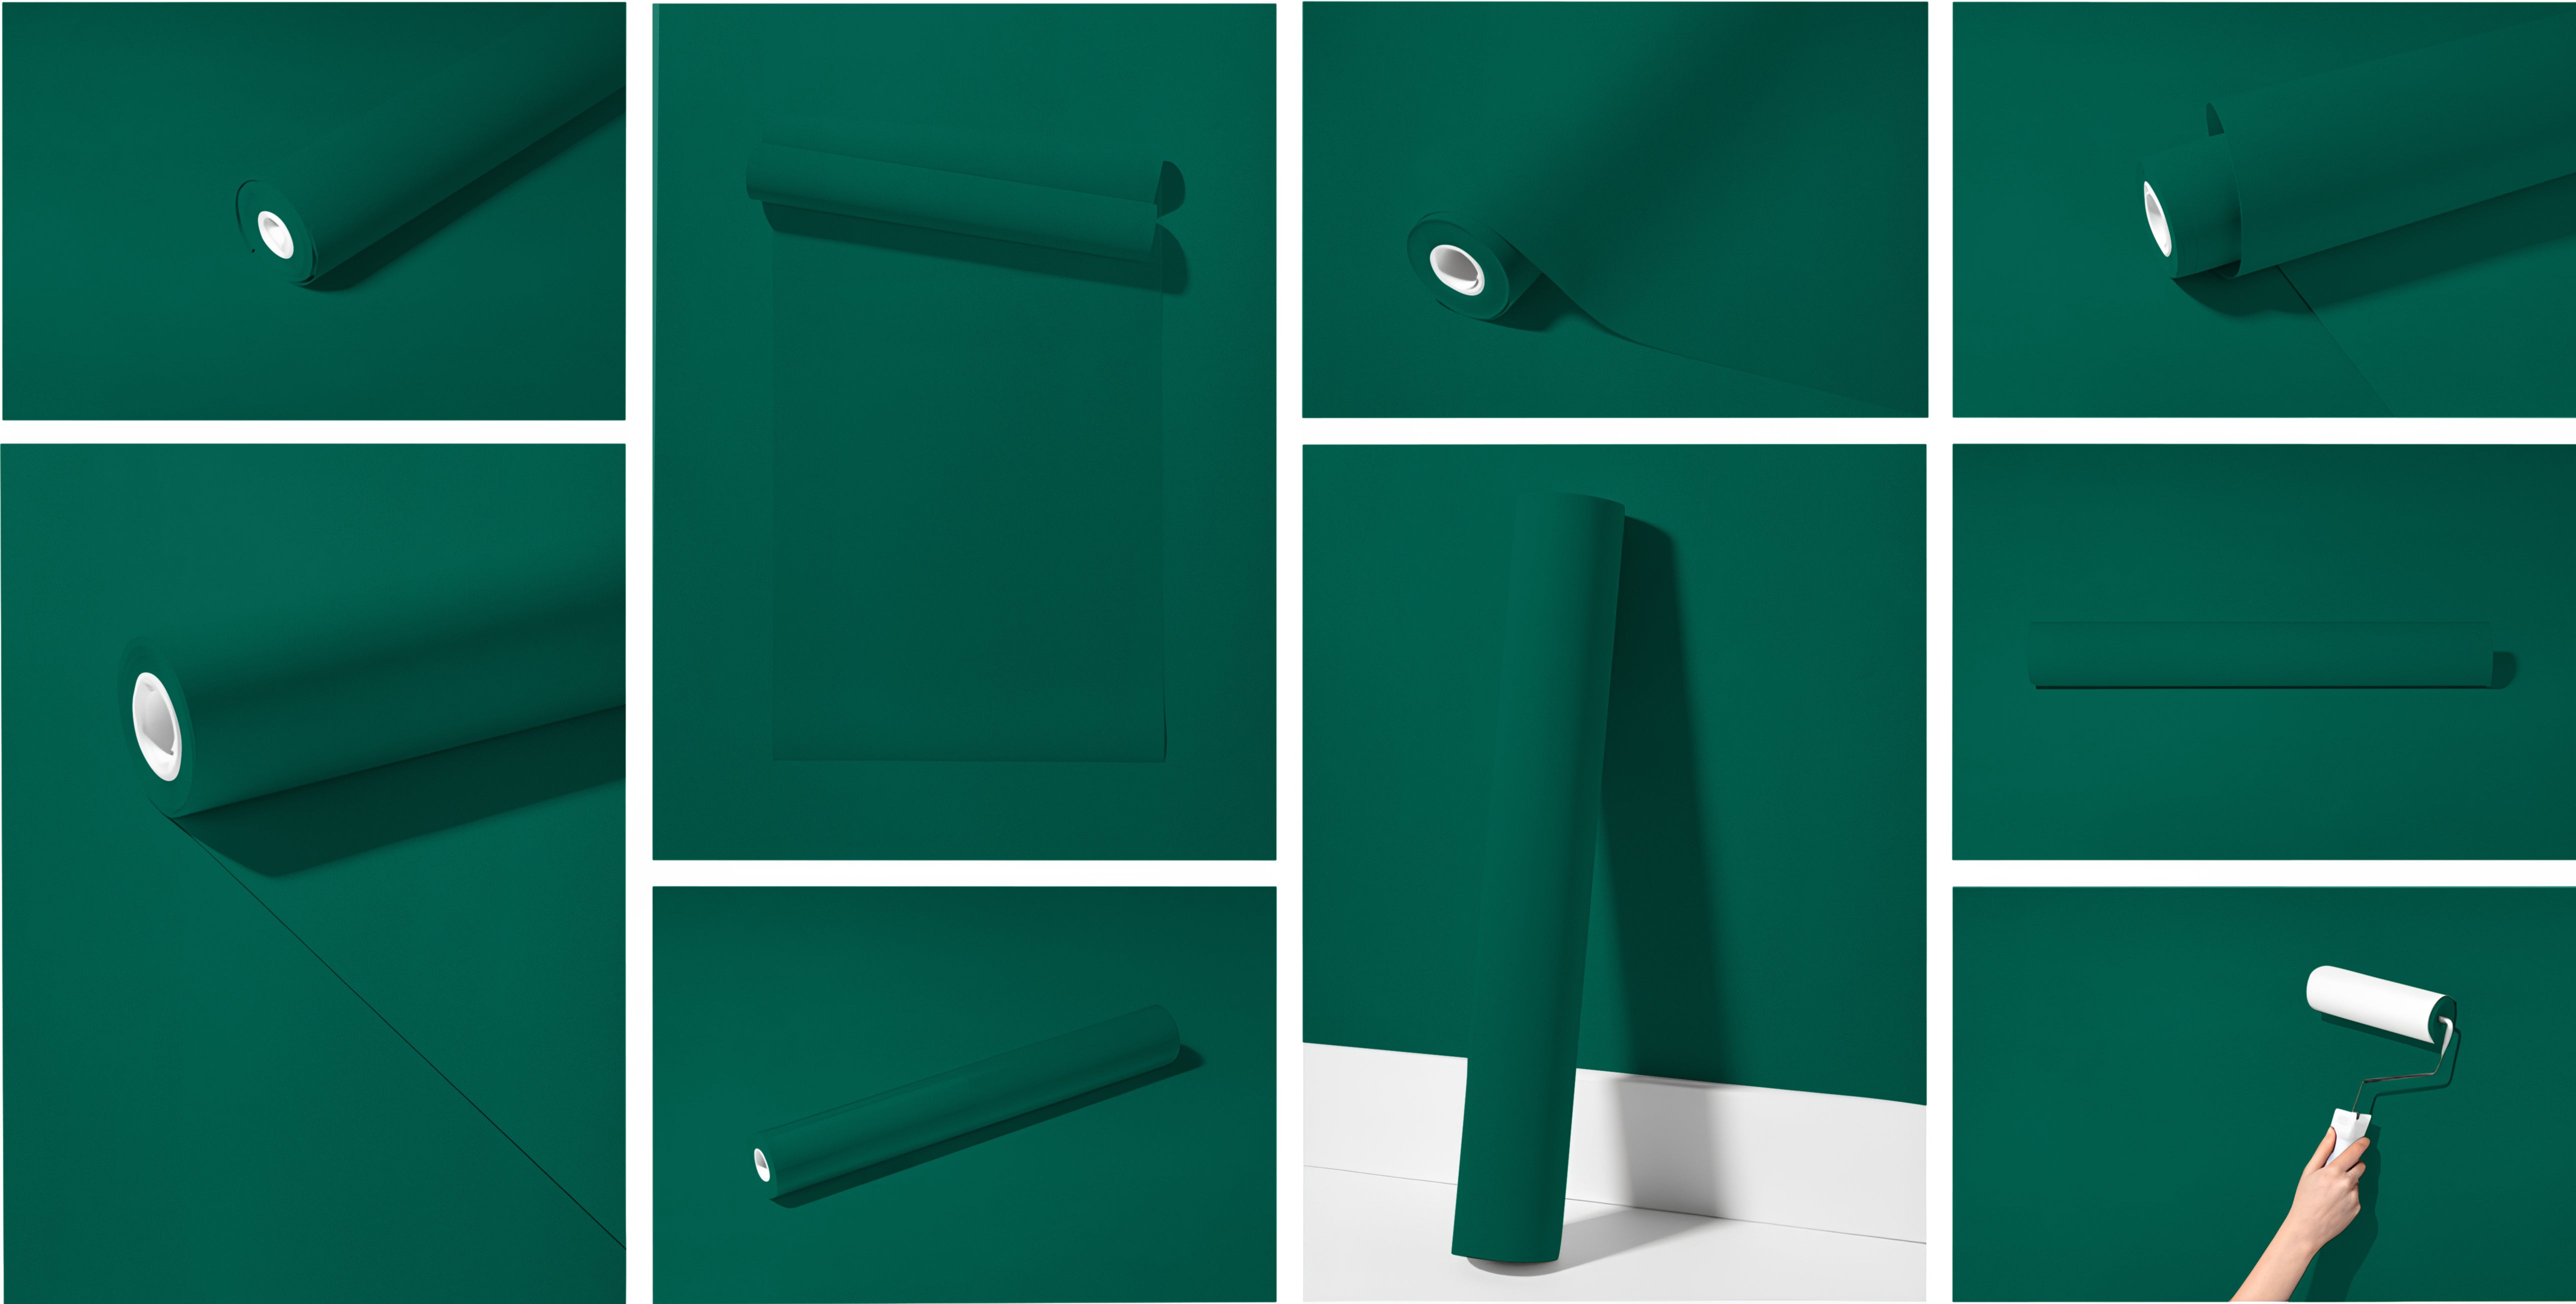 Peel & Stick Removable Re-usable Paint - Color RAL 6026 Opal Green - offRAL™ - RALRAW LLC, USA